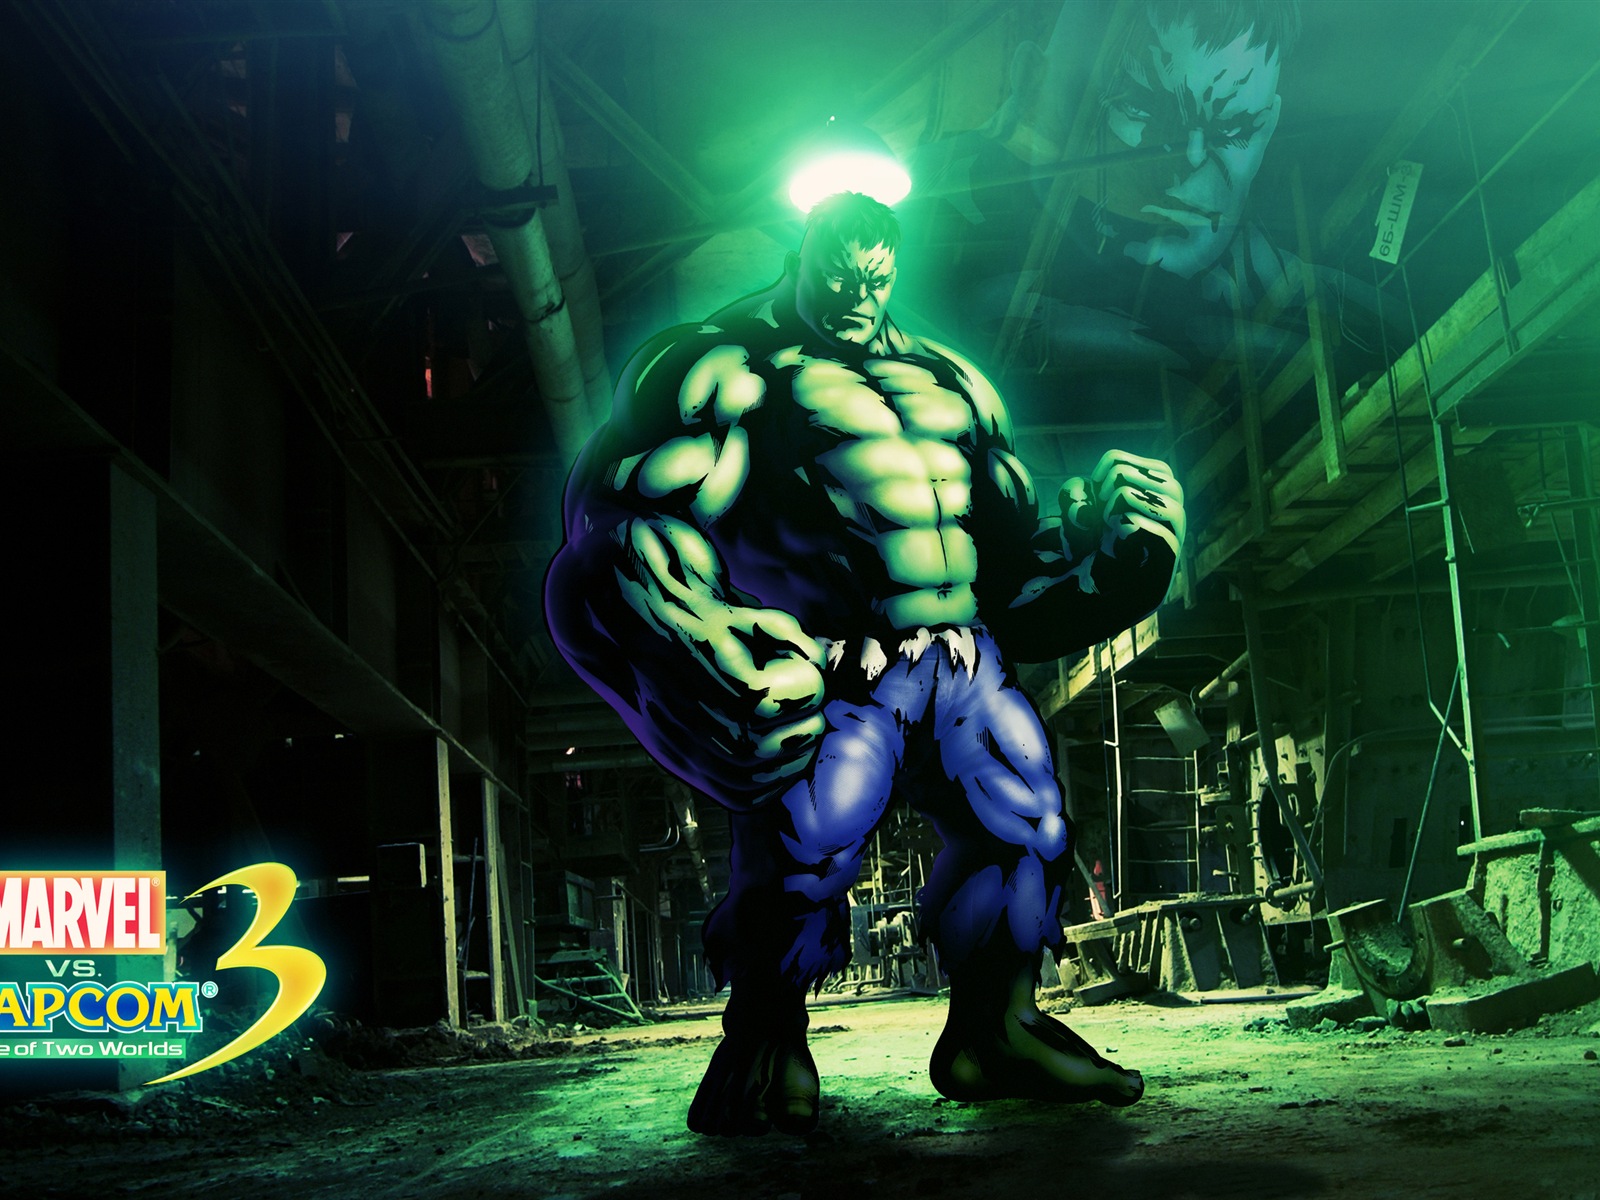 Marvel VS. Capcom 3: Fate of Two Worlds HD game wallpapers #11 - 1600x1200